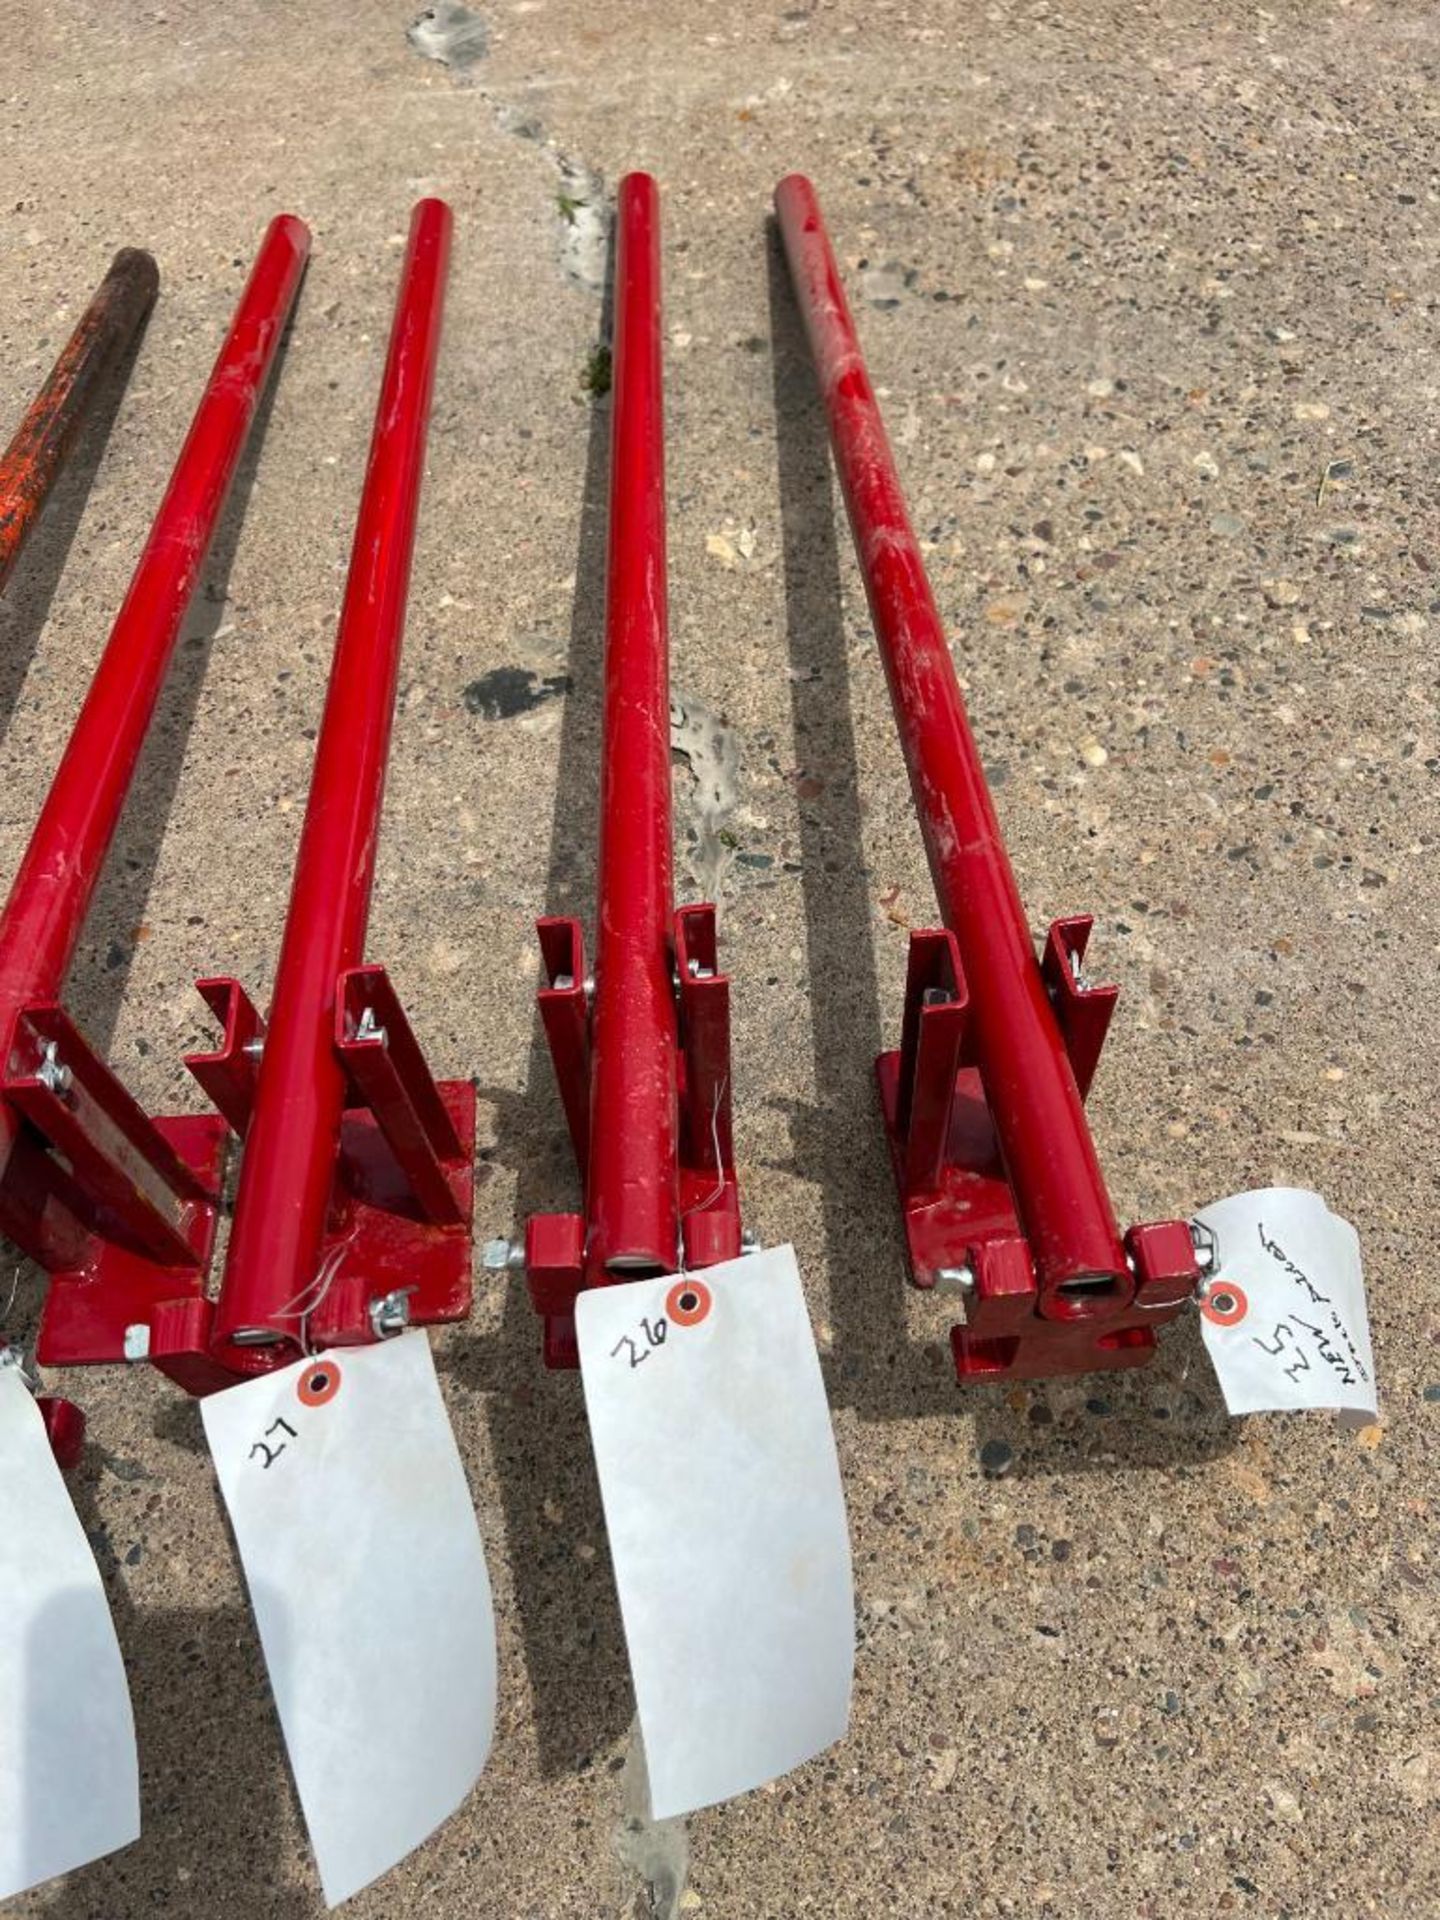 (New) Stake Puller. Located in Mt. Pleasant, IA